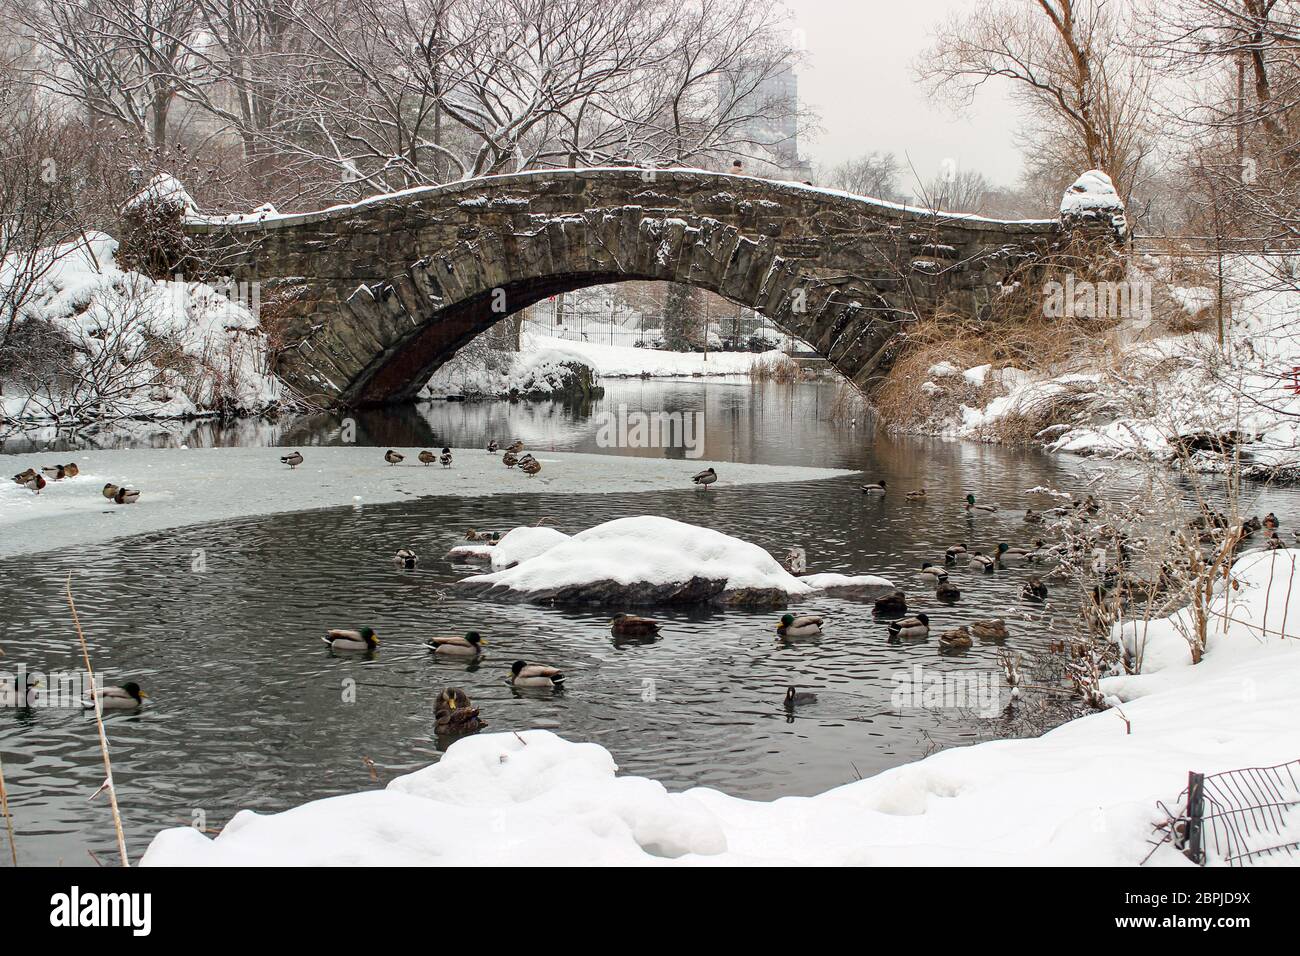 Gapstow Bridge over icy Pond on a grey winter day in Central Park, Manhattan, New York City, United States of America Stock Photo